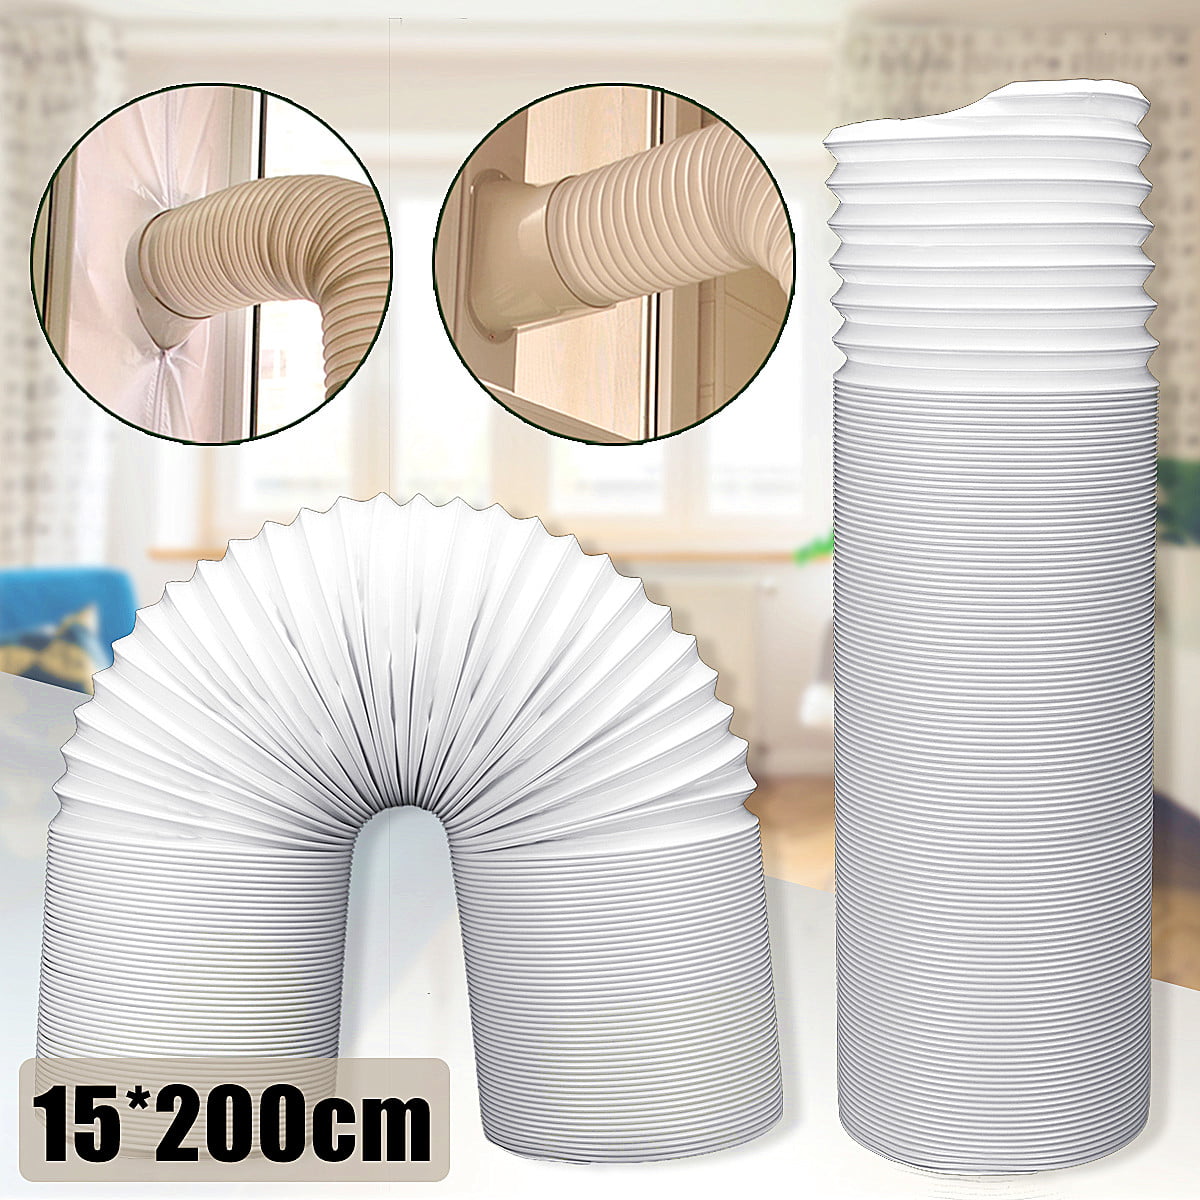 5 Diameter Flexible Counter-clockwise Thread Vent Hose Tube ，Universal Mobile Air Conditioning Exhaust Pipe Telescopic Heat Pipe Portable Air Conditioner Exhaust Hose Pipe Length 59in/78in 